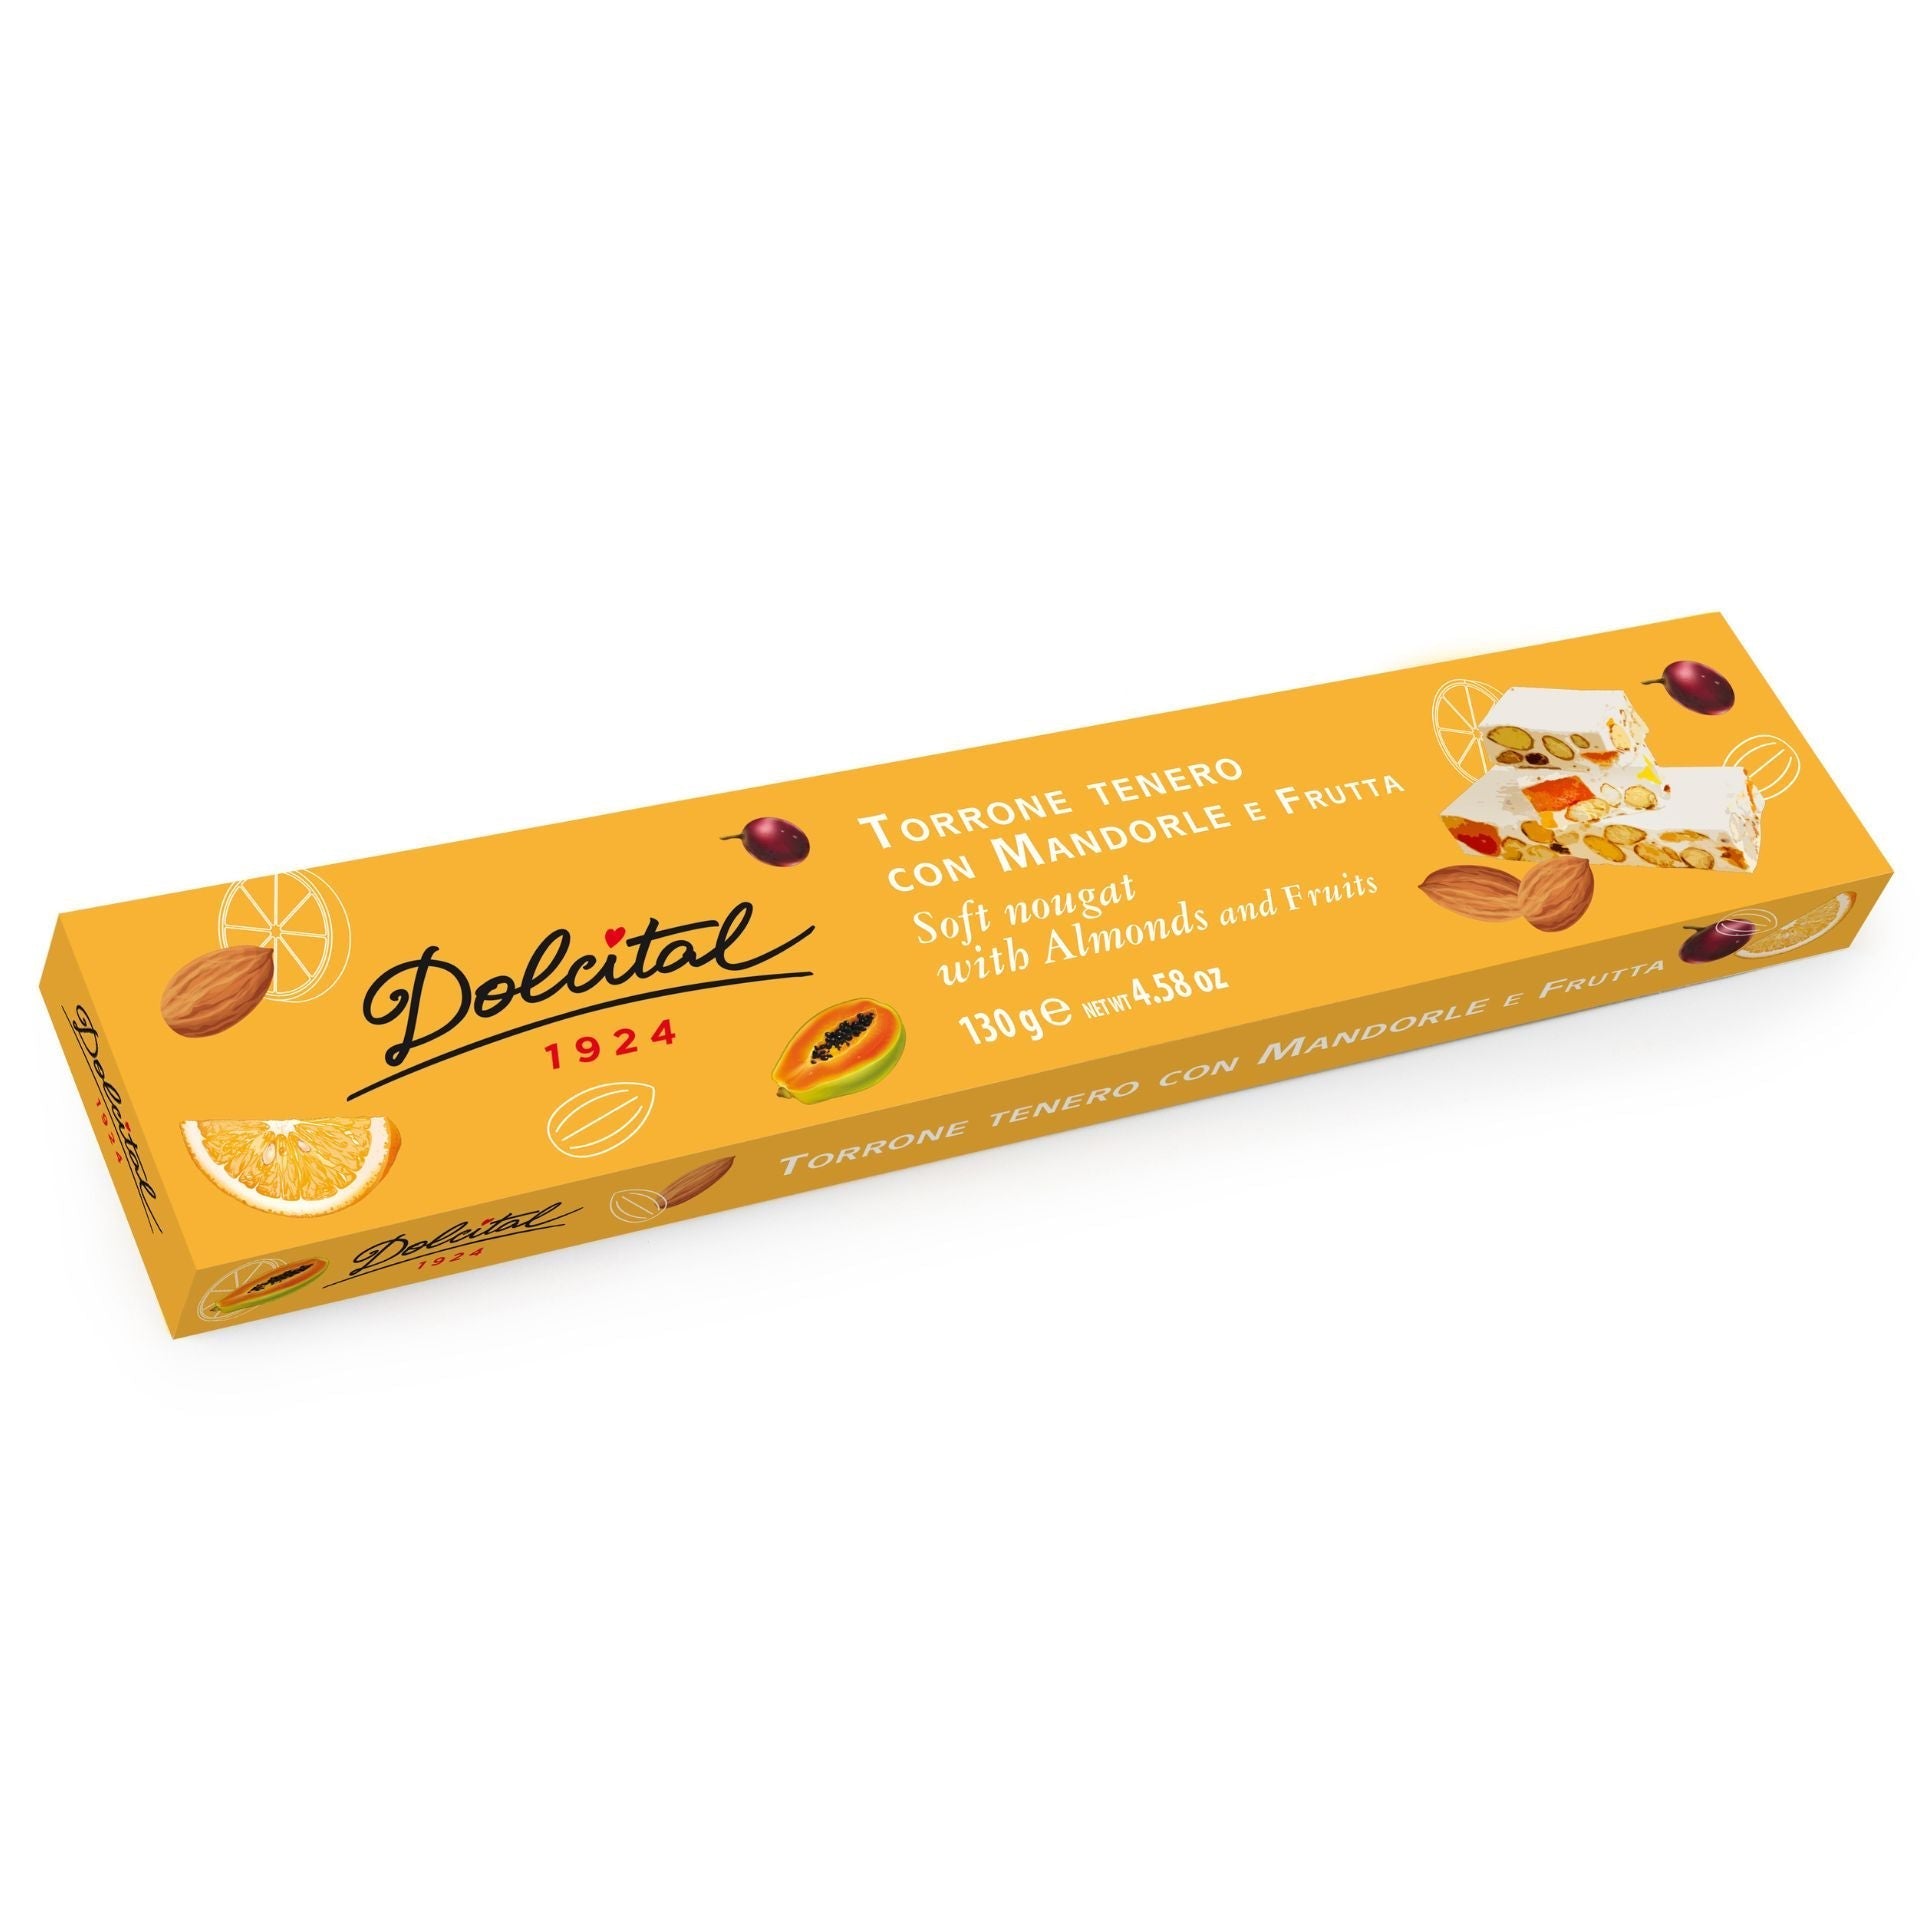 Dolcital Almond & Fruit Soft Nougat 130g (Box)  | Imported and distributed in the UK by Just Gourmet Foods